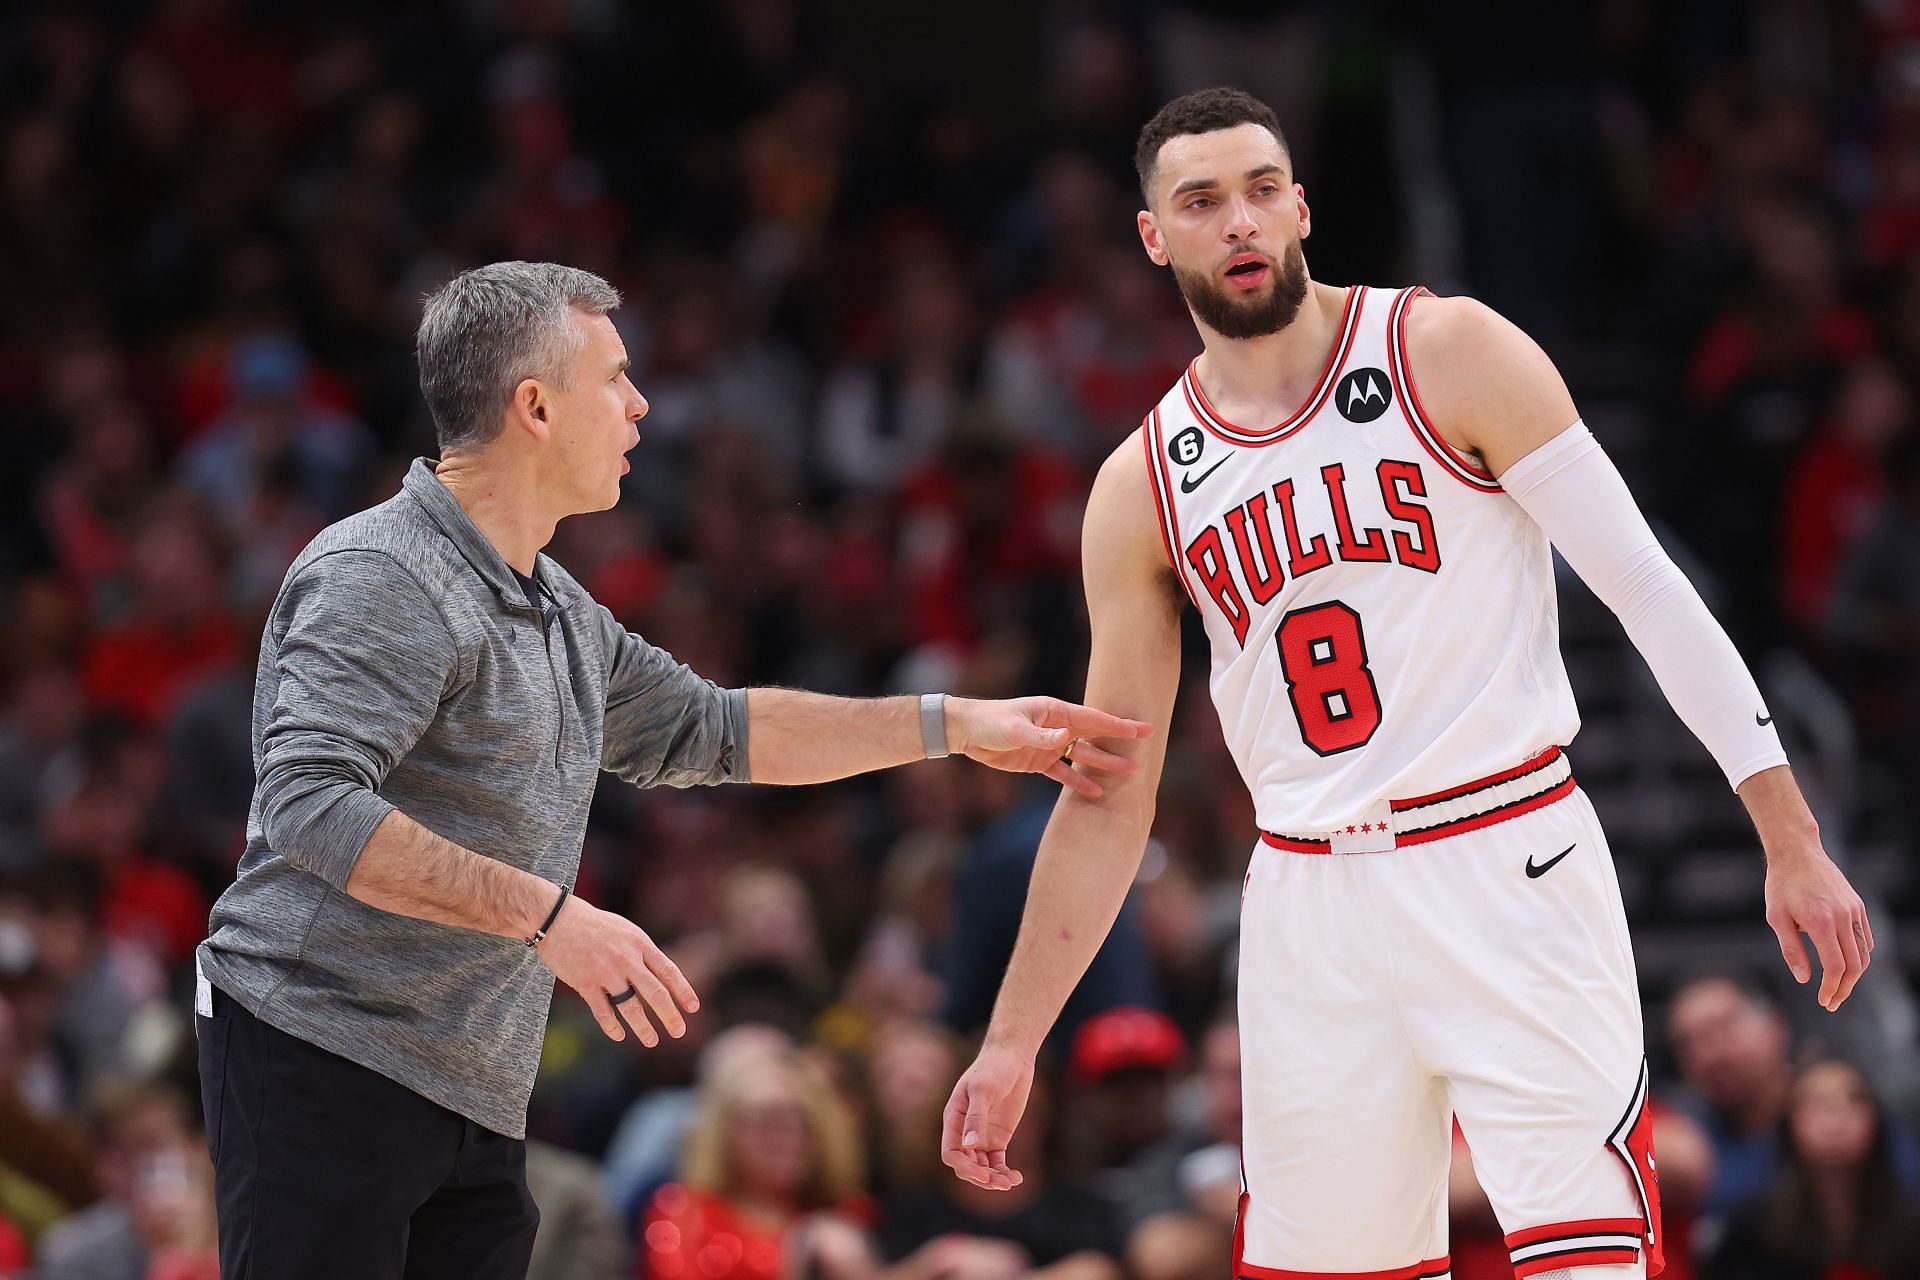 LaVine may be traded before the deadline. (Image via Getty Images)